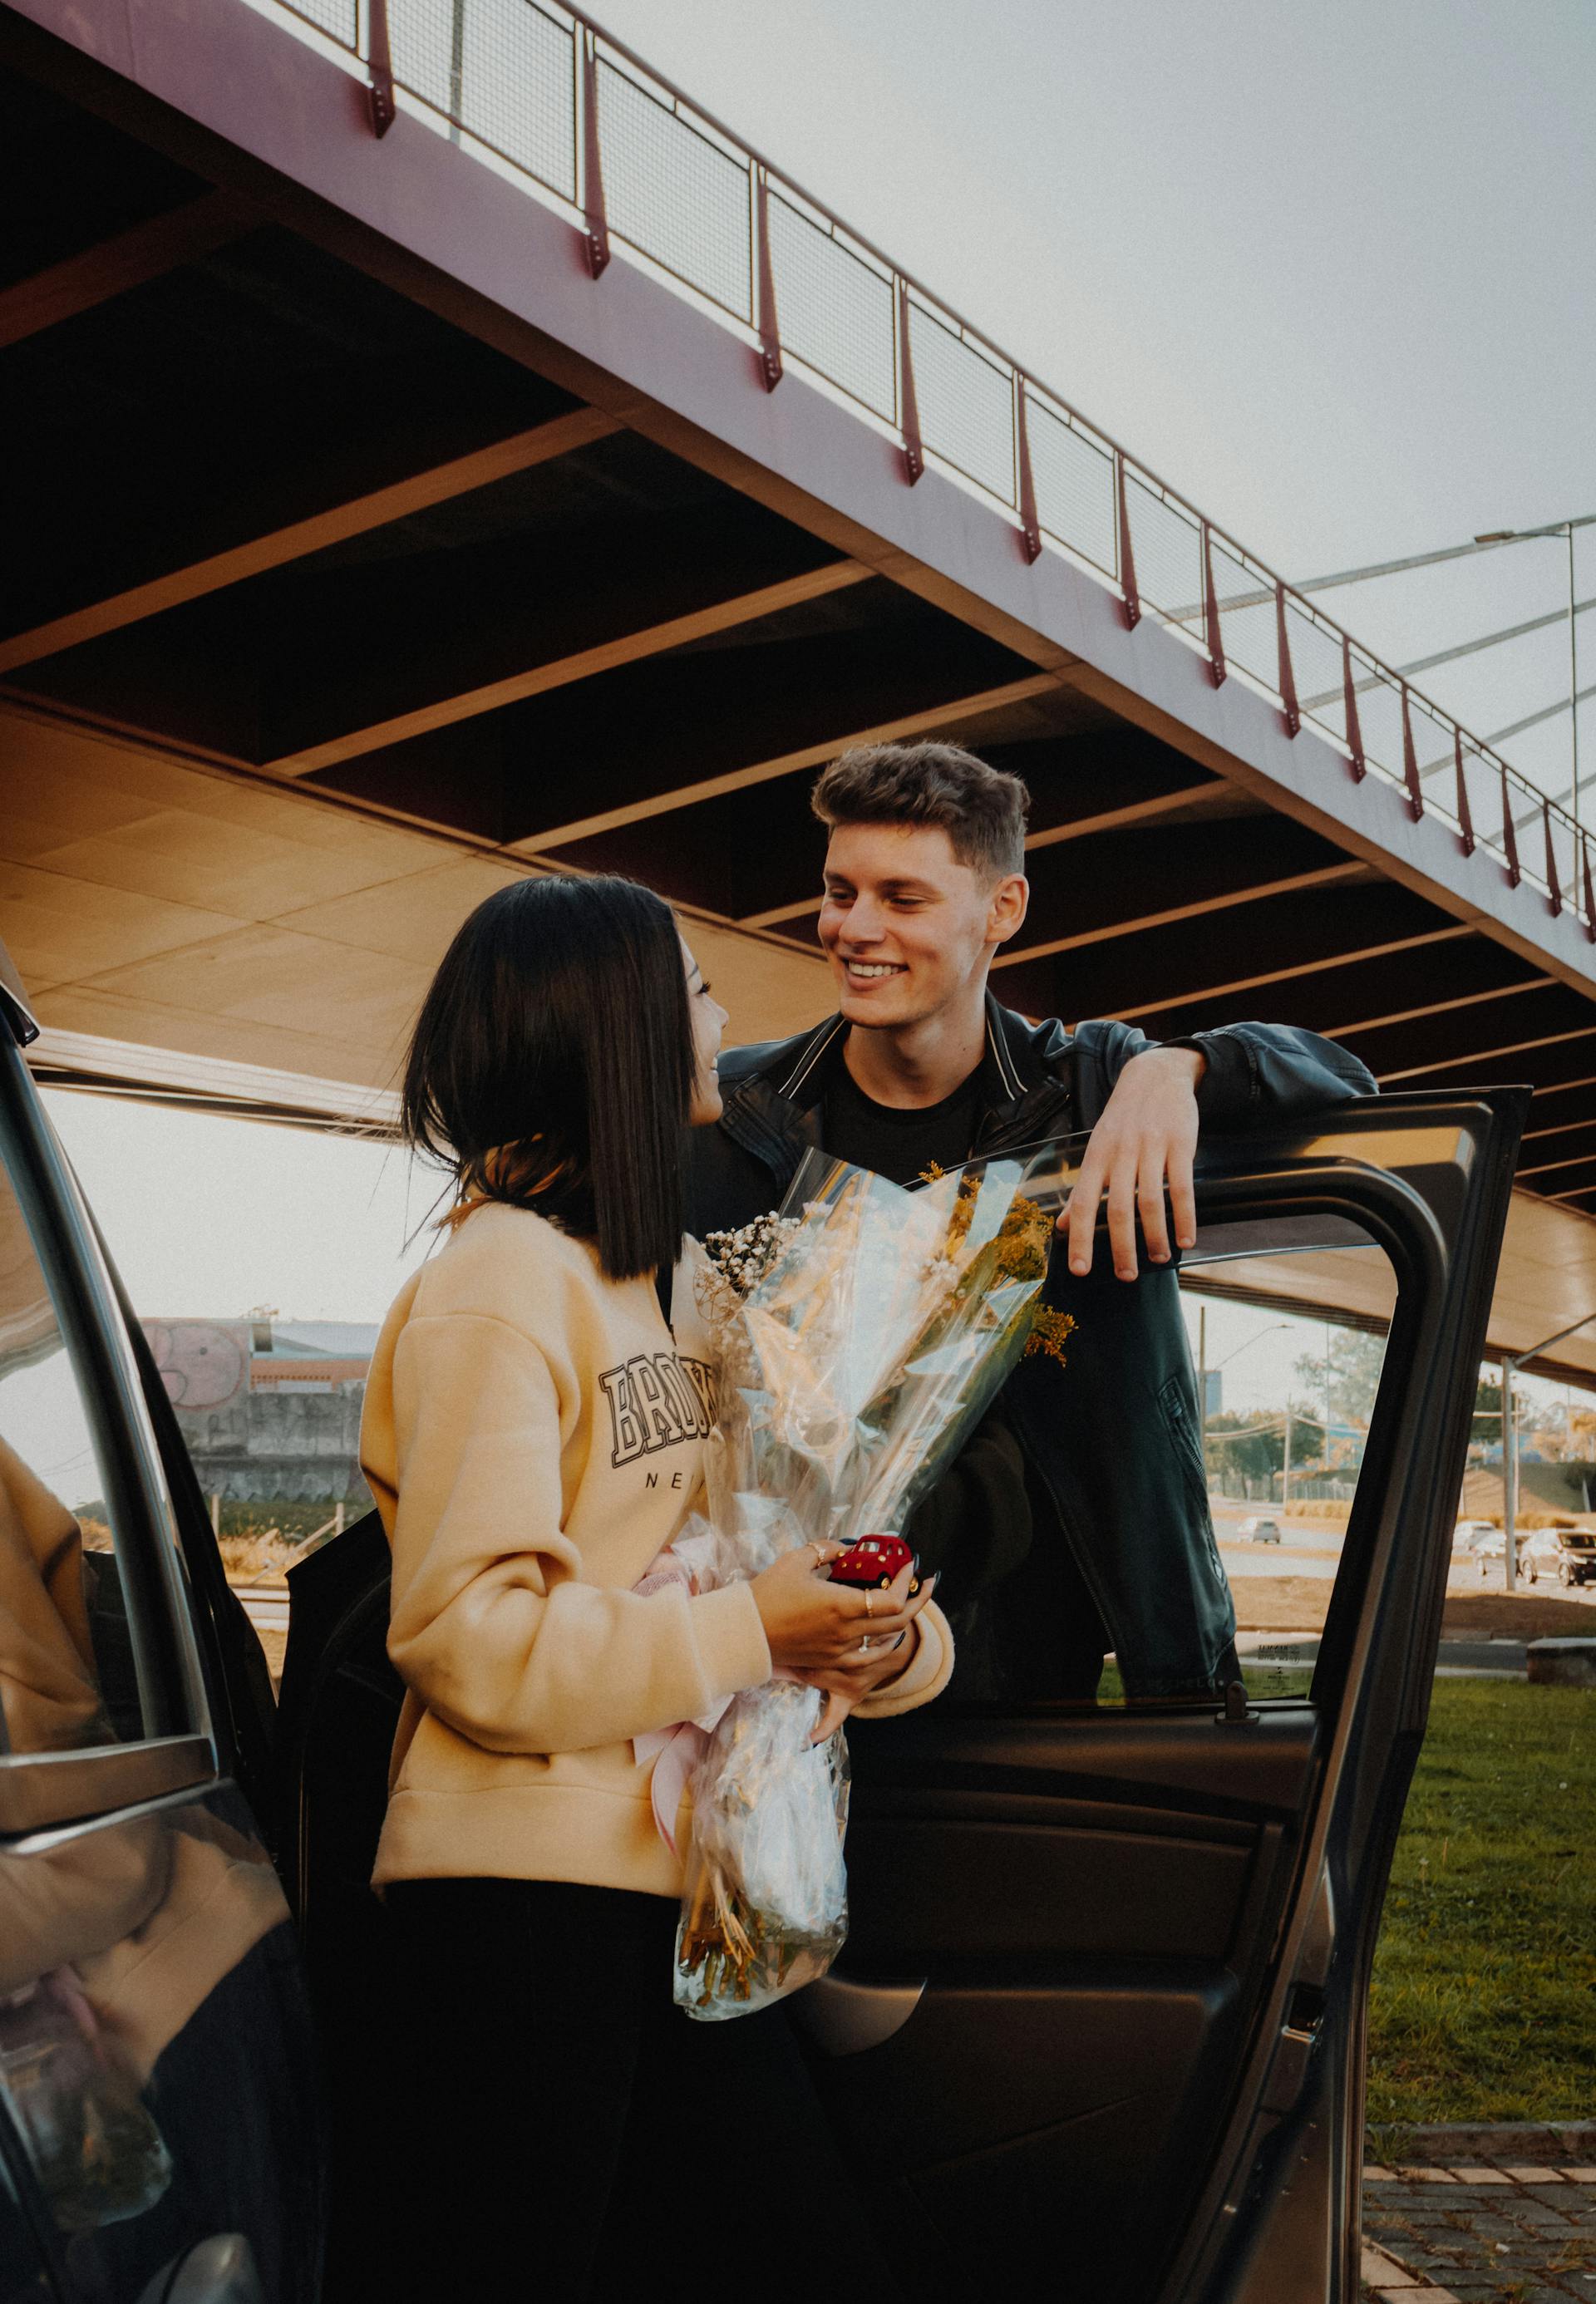 A woman holding flowers and looking at her boyfriend | Source: Pexels